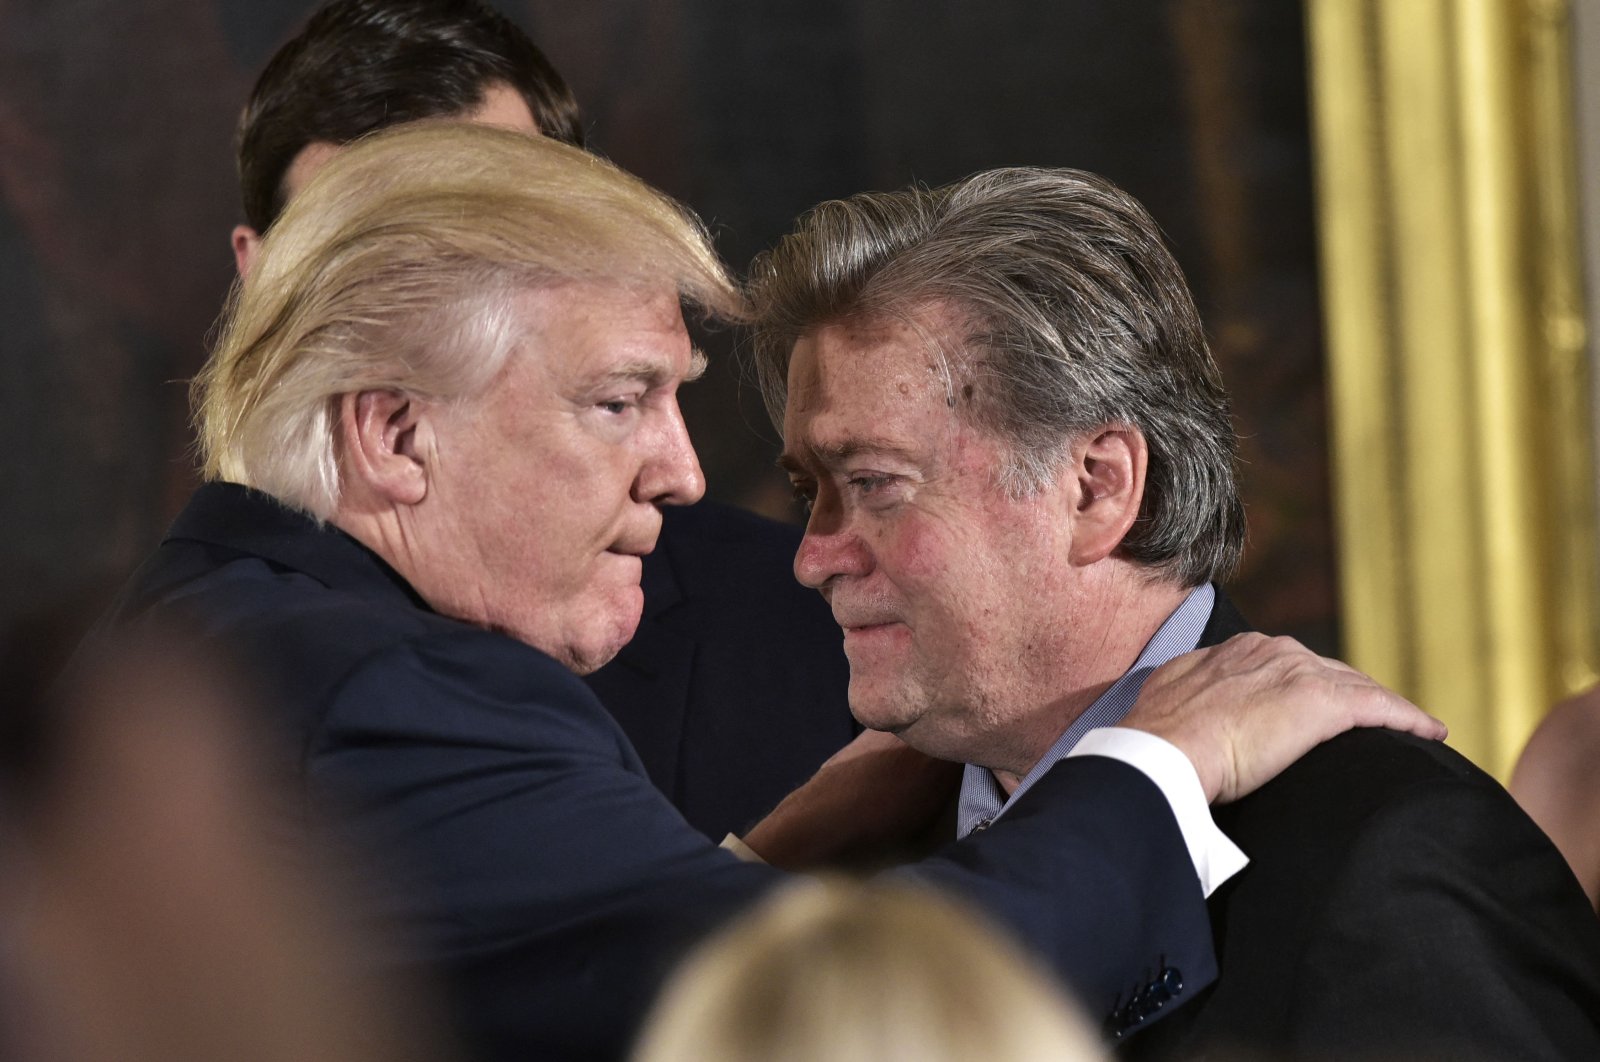 Then-U.S. President Donald Trump (L) congratulates Senior Counselor to the President Stephen Bannon during the swearing-in of senior staff in the East Room of the White House in Washington, D.C., Jan. 22, 2017. (AFP)